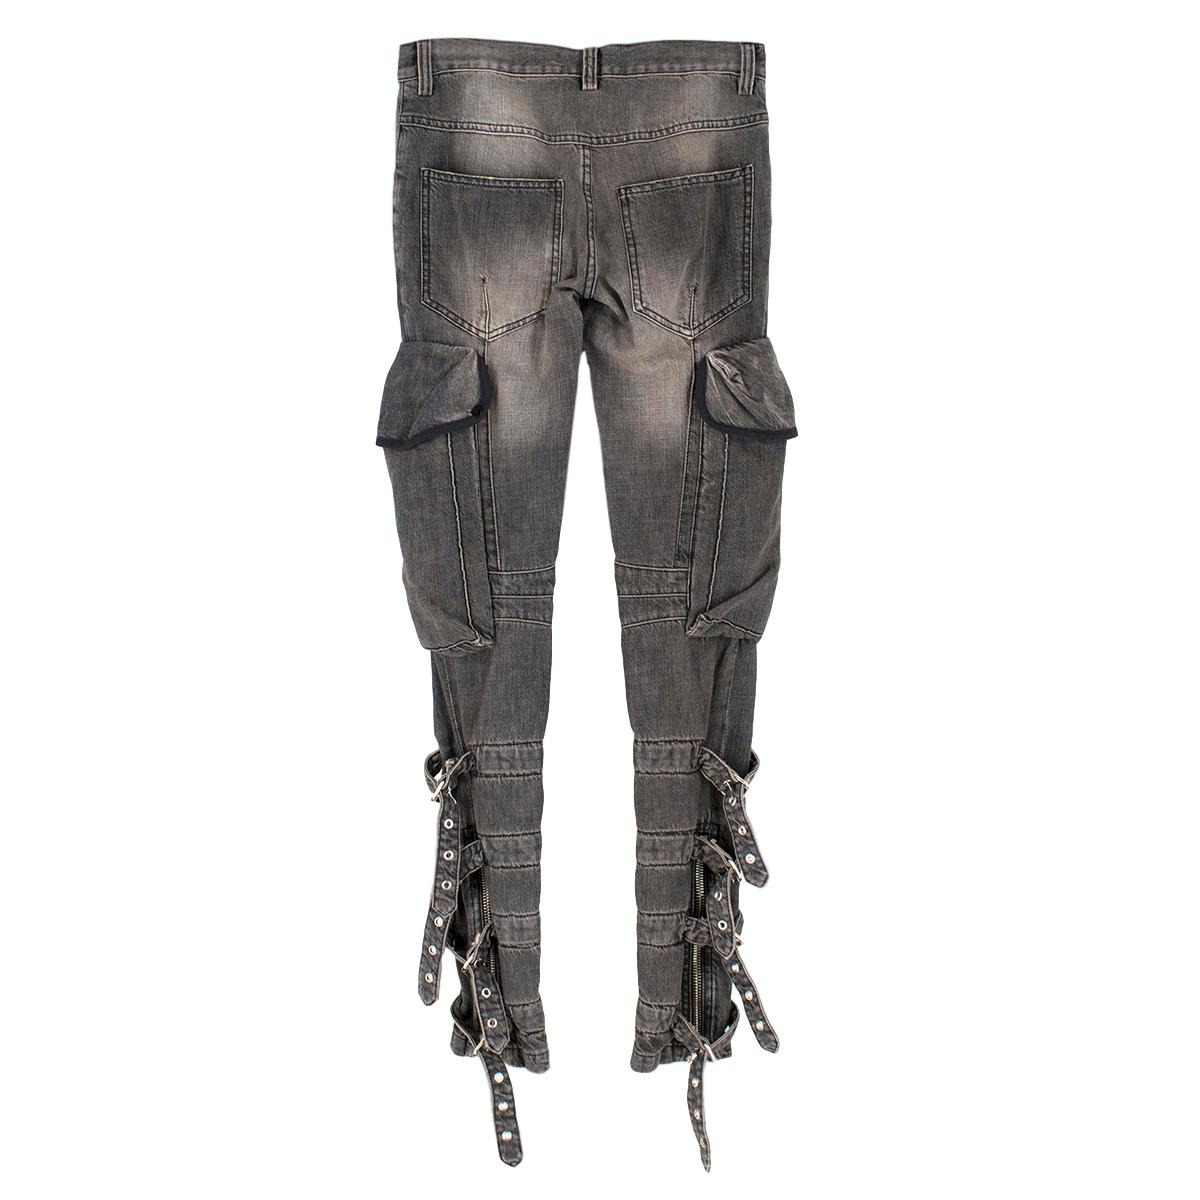 Balmain Cotton Washed Out Grey Belted Hem Jeans

- 100% cotton
- Washed out, grey
- Zip fly and hook and bar fastenings at the waistline
- Two pockets both at the front, side and at the back
- Adjustable metal buckle strap and zip fastening at the